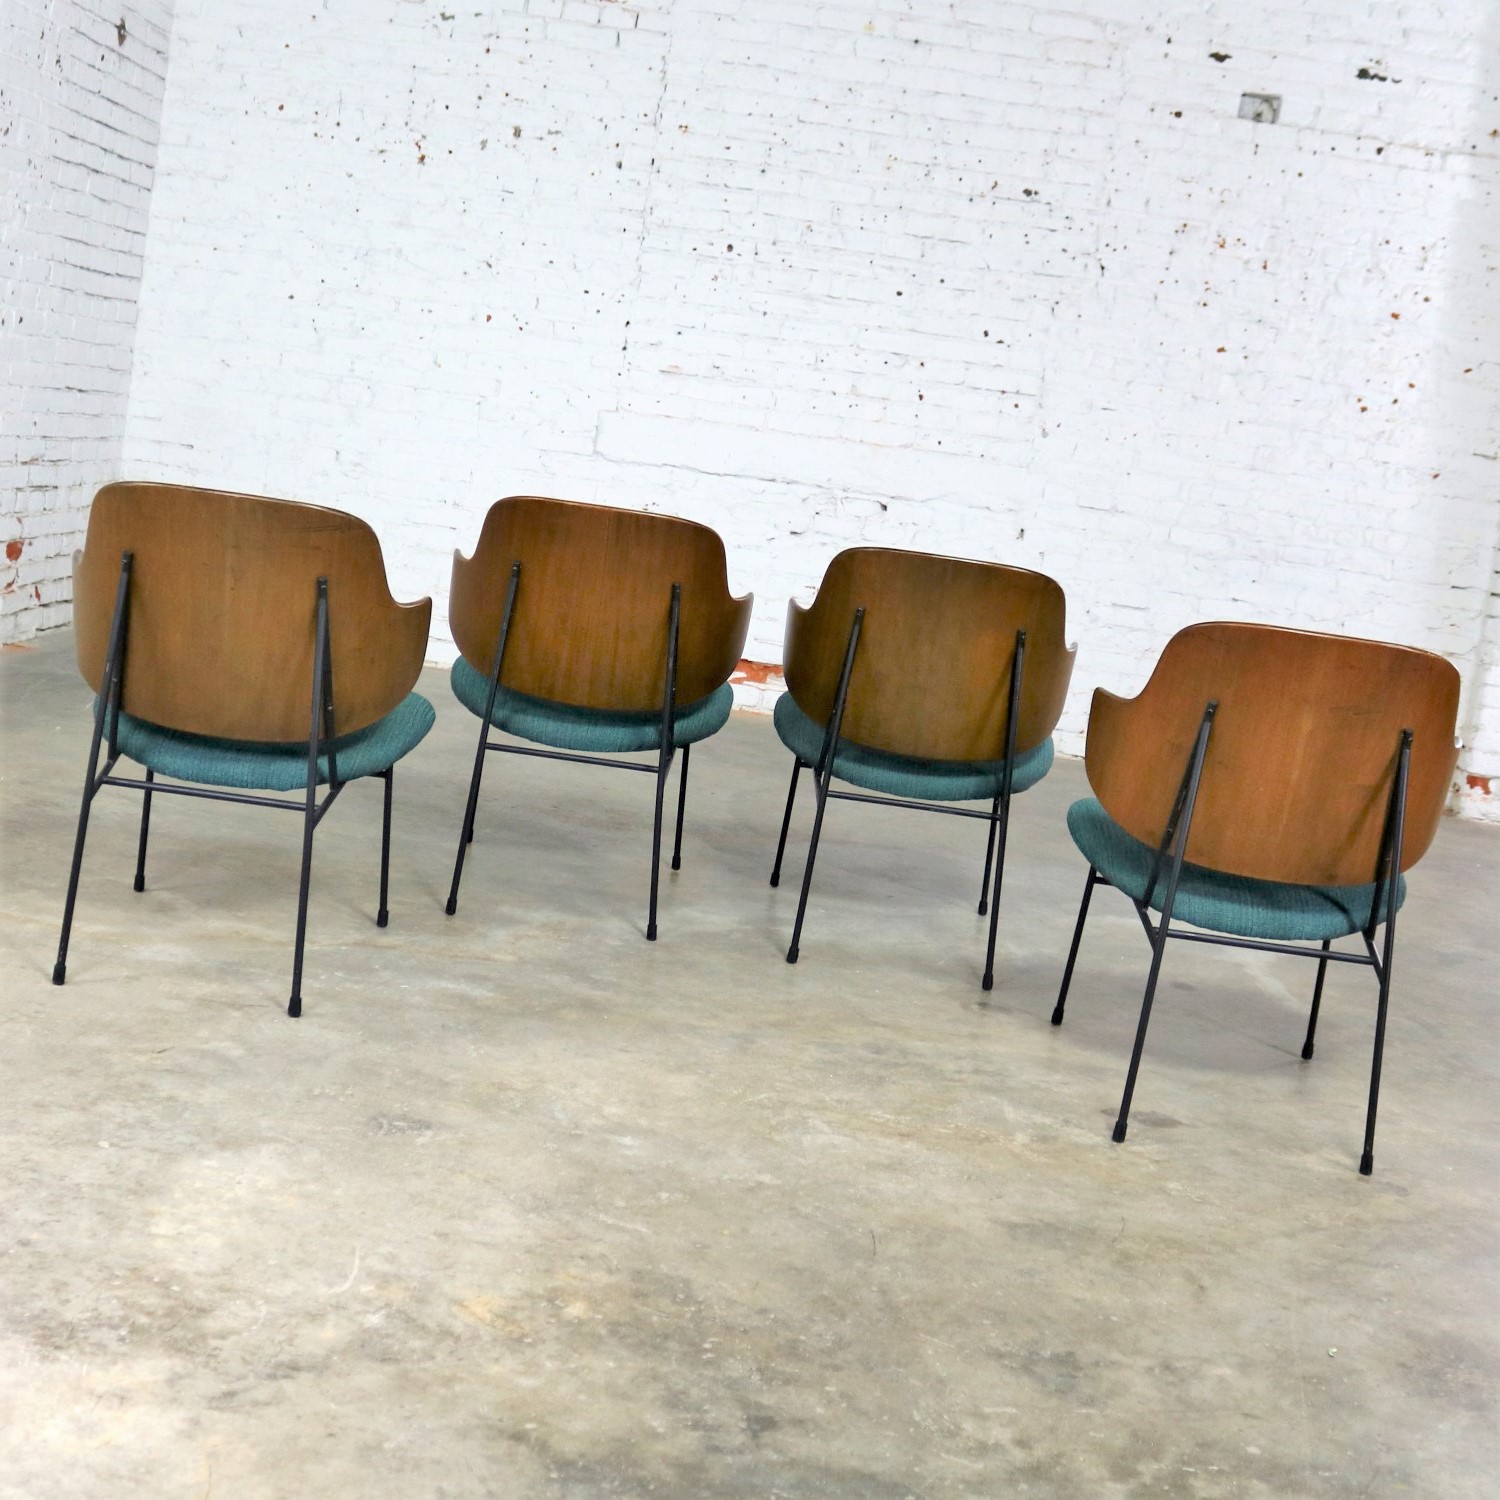 Set of Four Ib Kofod-Larsen Penguin Chairs with Walnut Molded Backs and Turquoise Seats